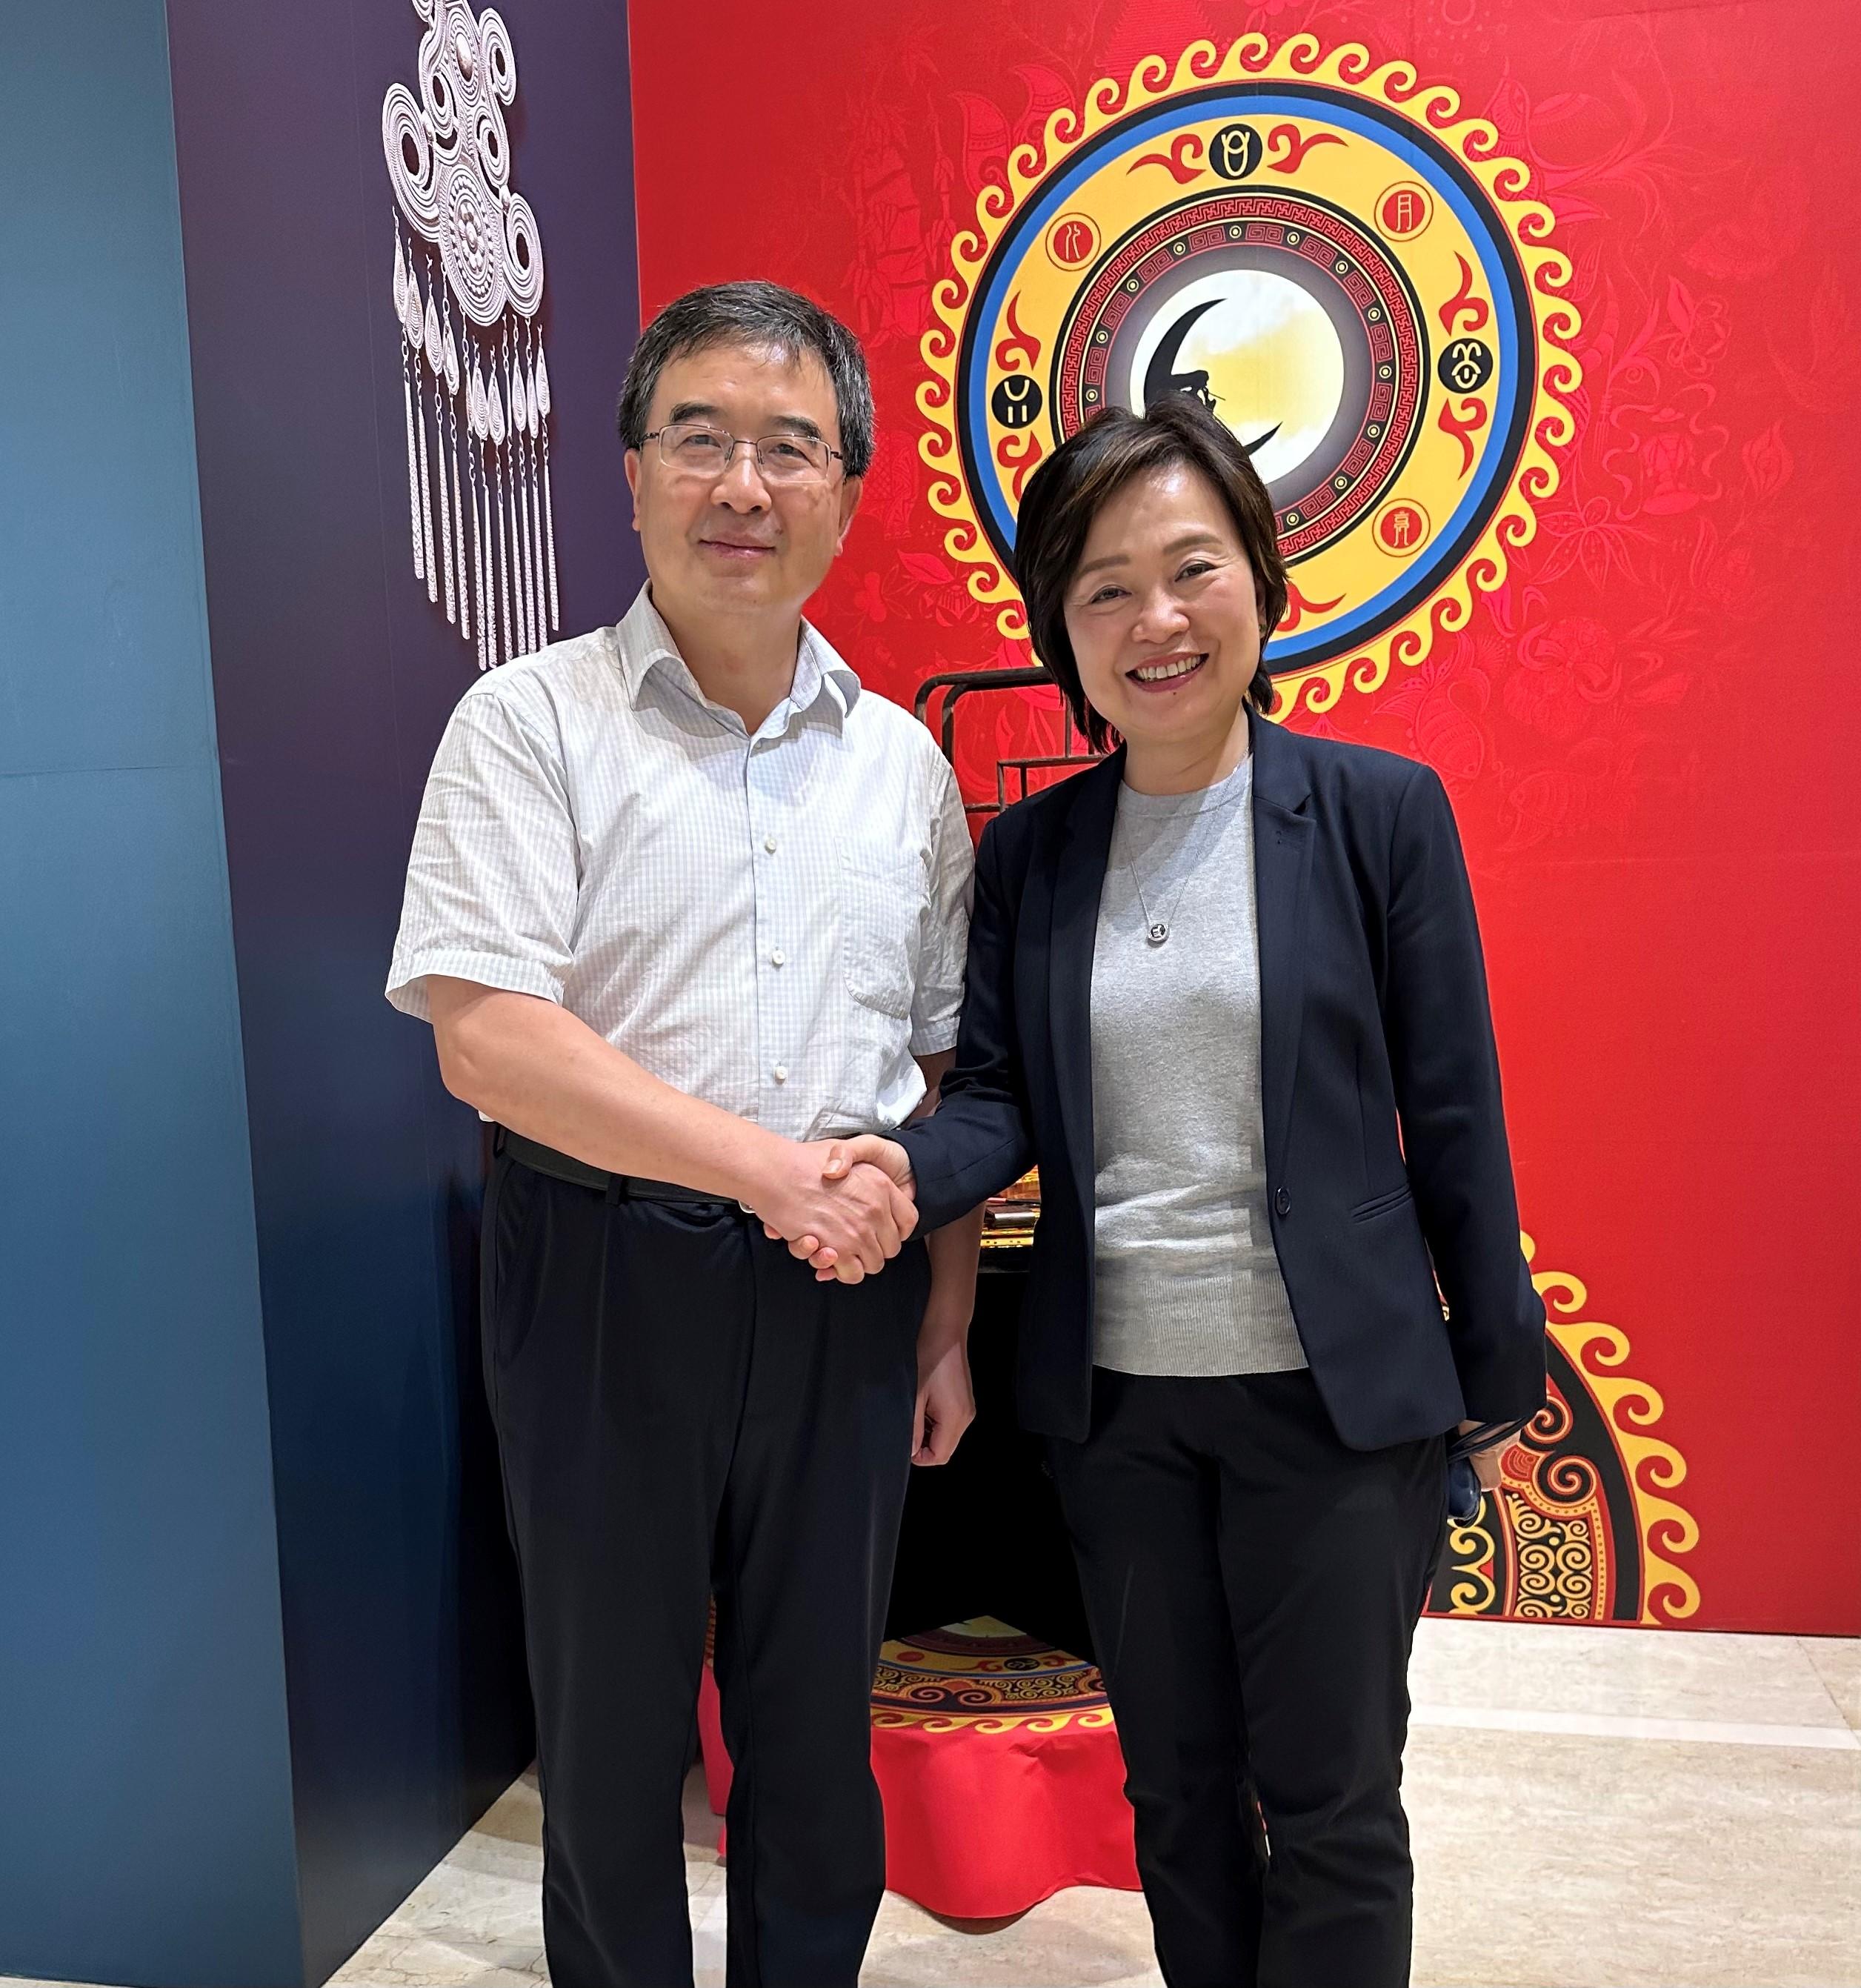 The Secretary for Education, Dr Choi Yuk-lin (right), met the Director of the Beijing Municipal Education Commission, Mr Li Yi (left), yesterday (September 25) to discuss educational issues of mutual interest for Beijing and Hong Kong.